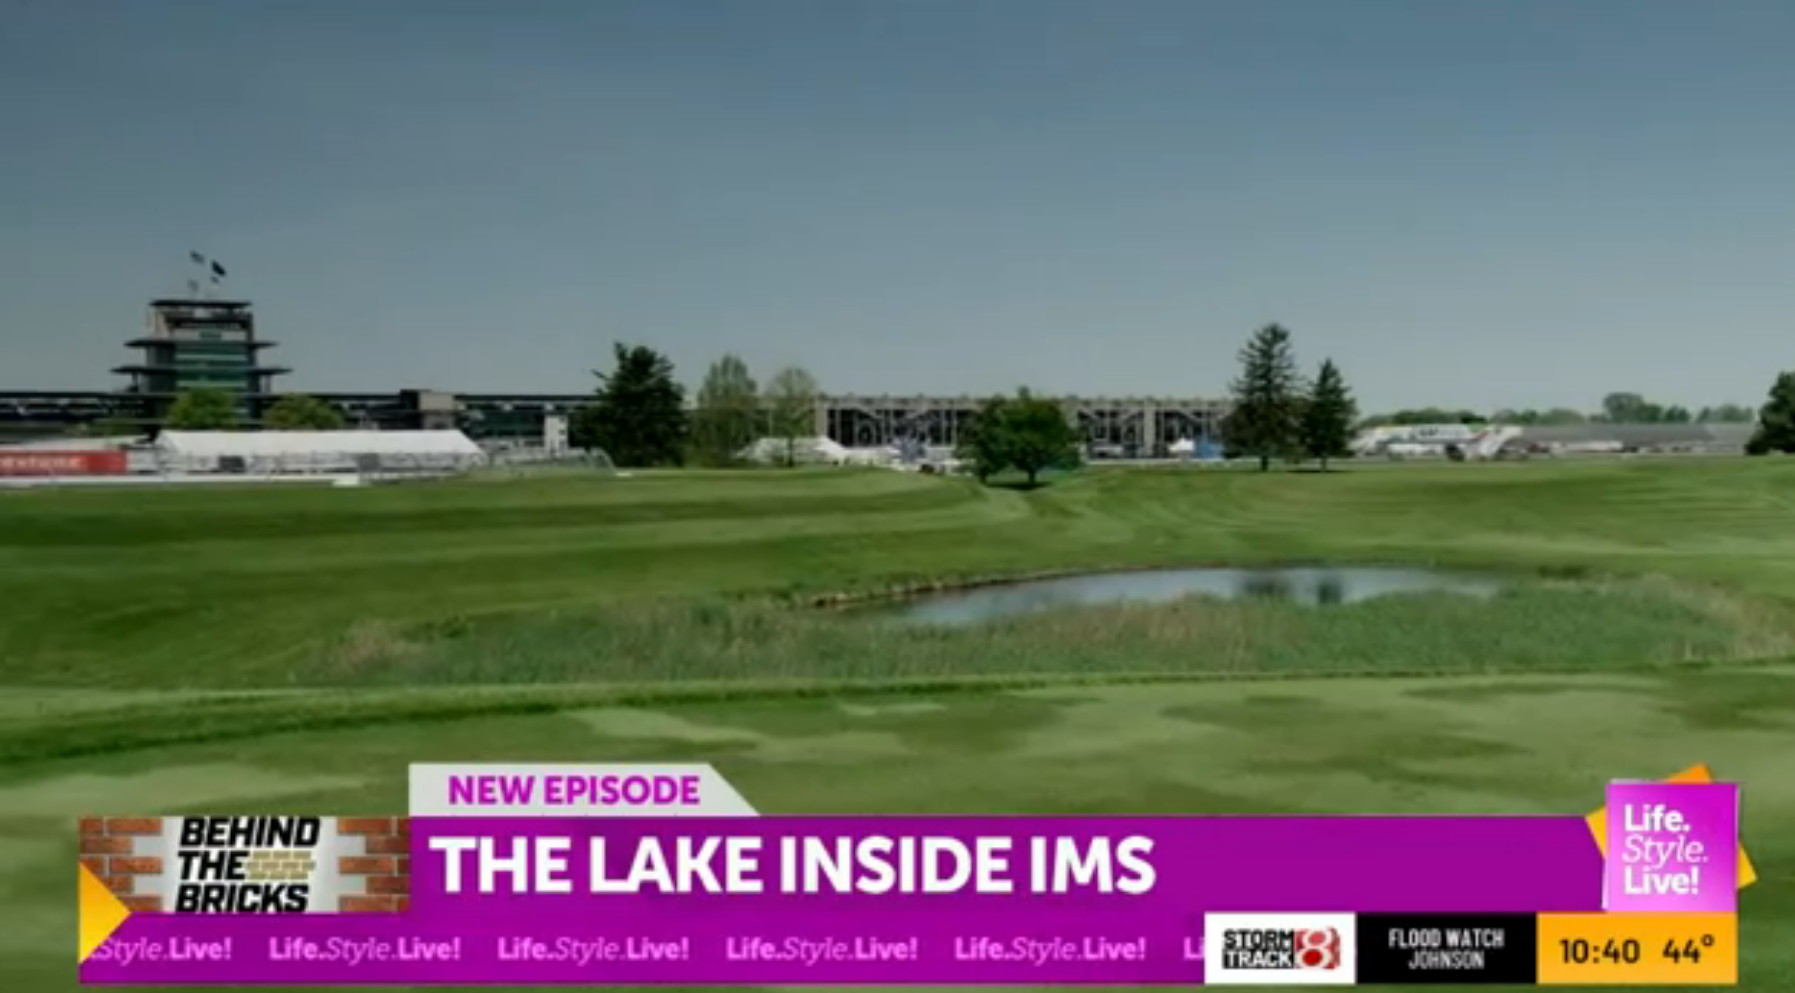 Did you know there is a lake inside the Indianapolis Motor Speedway?